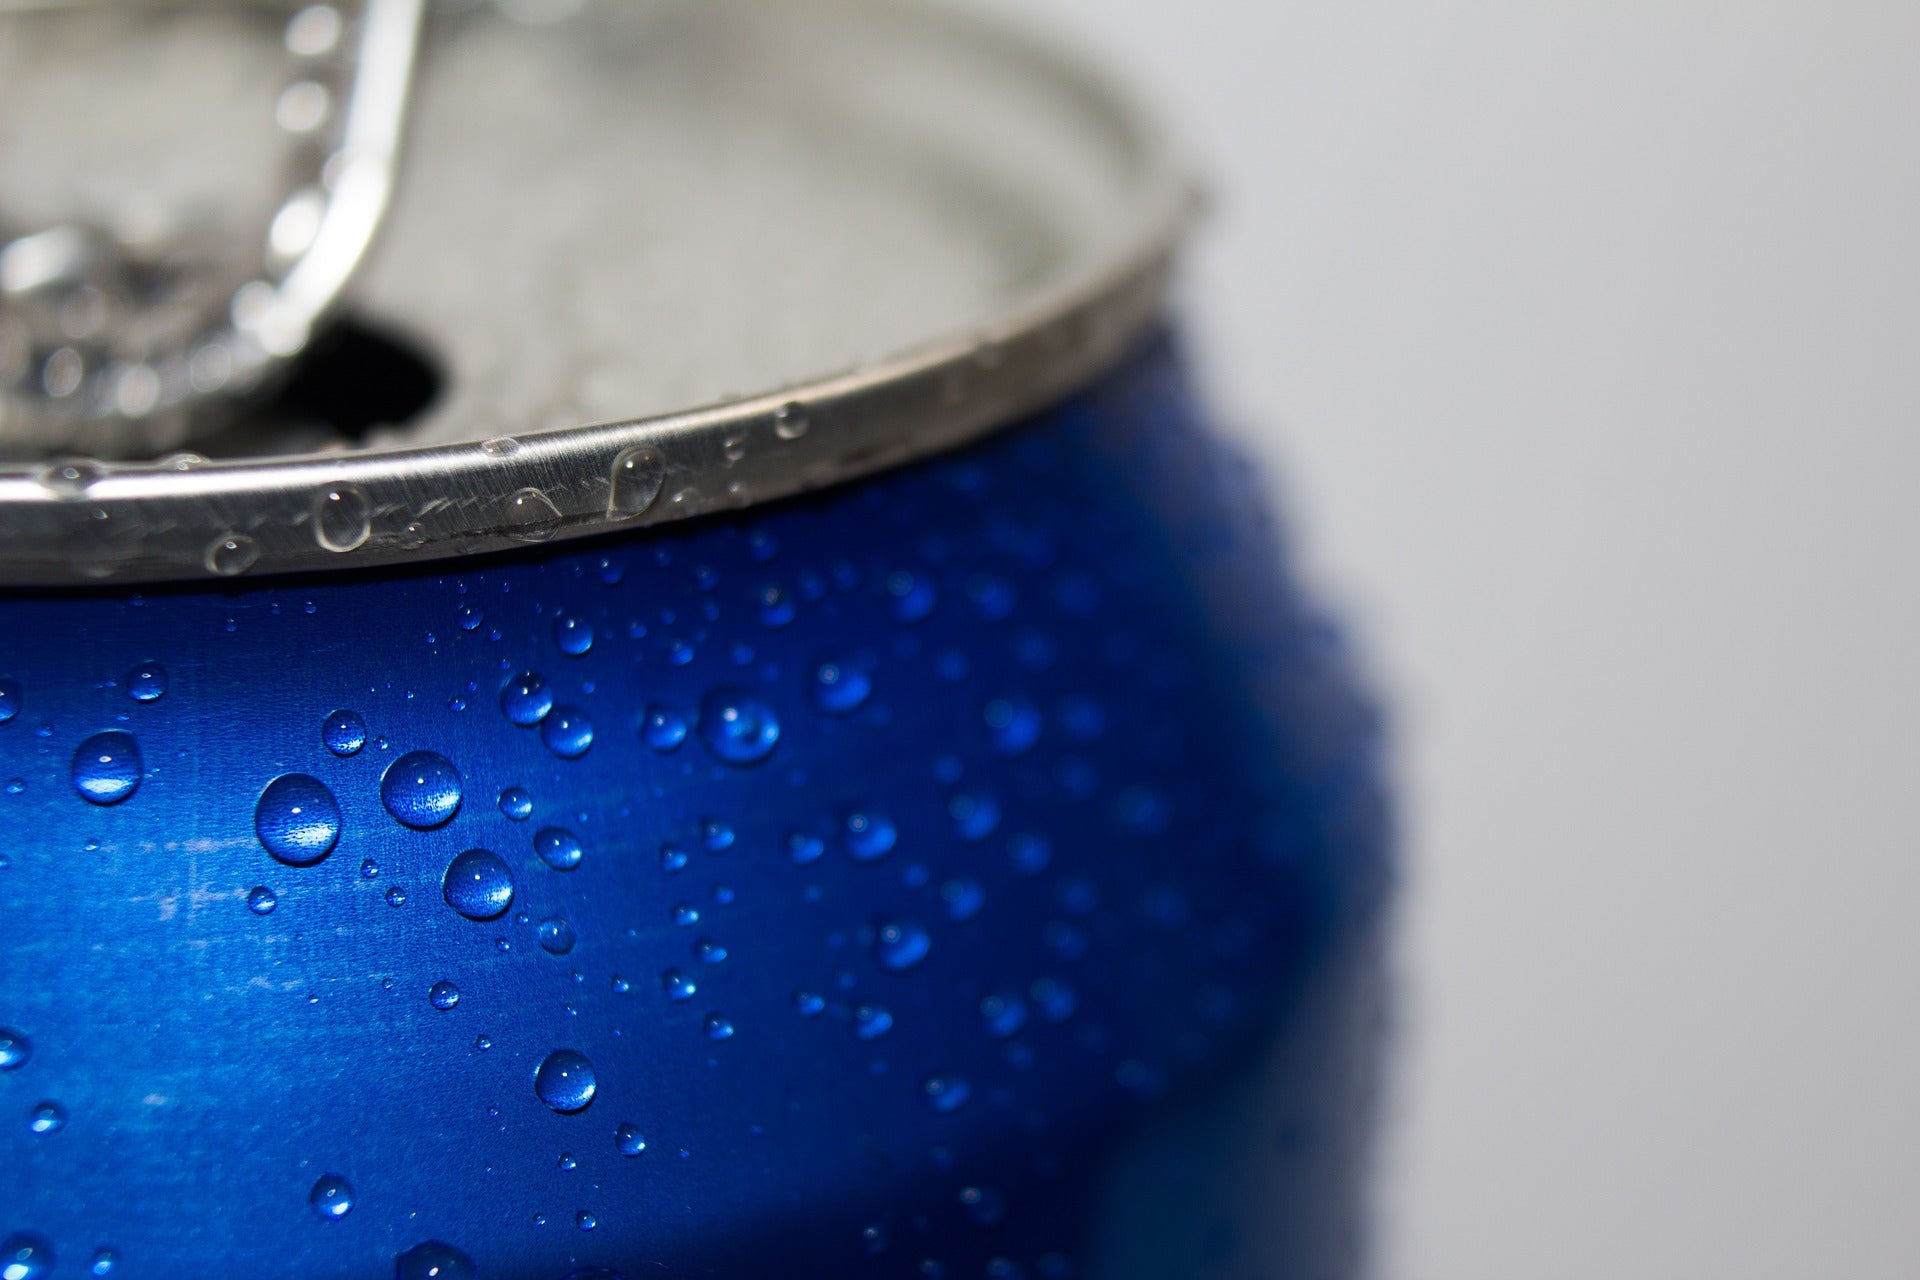 Cans vs Bottles: Which is Best for Beer?